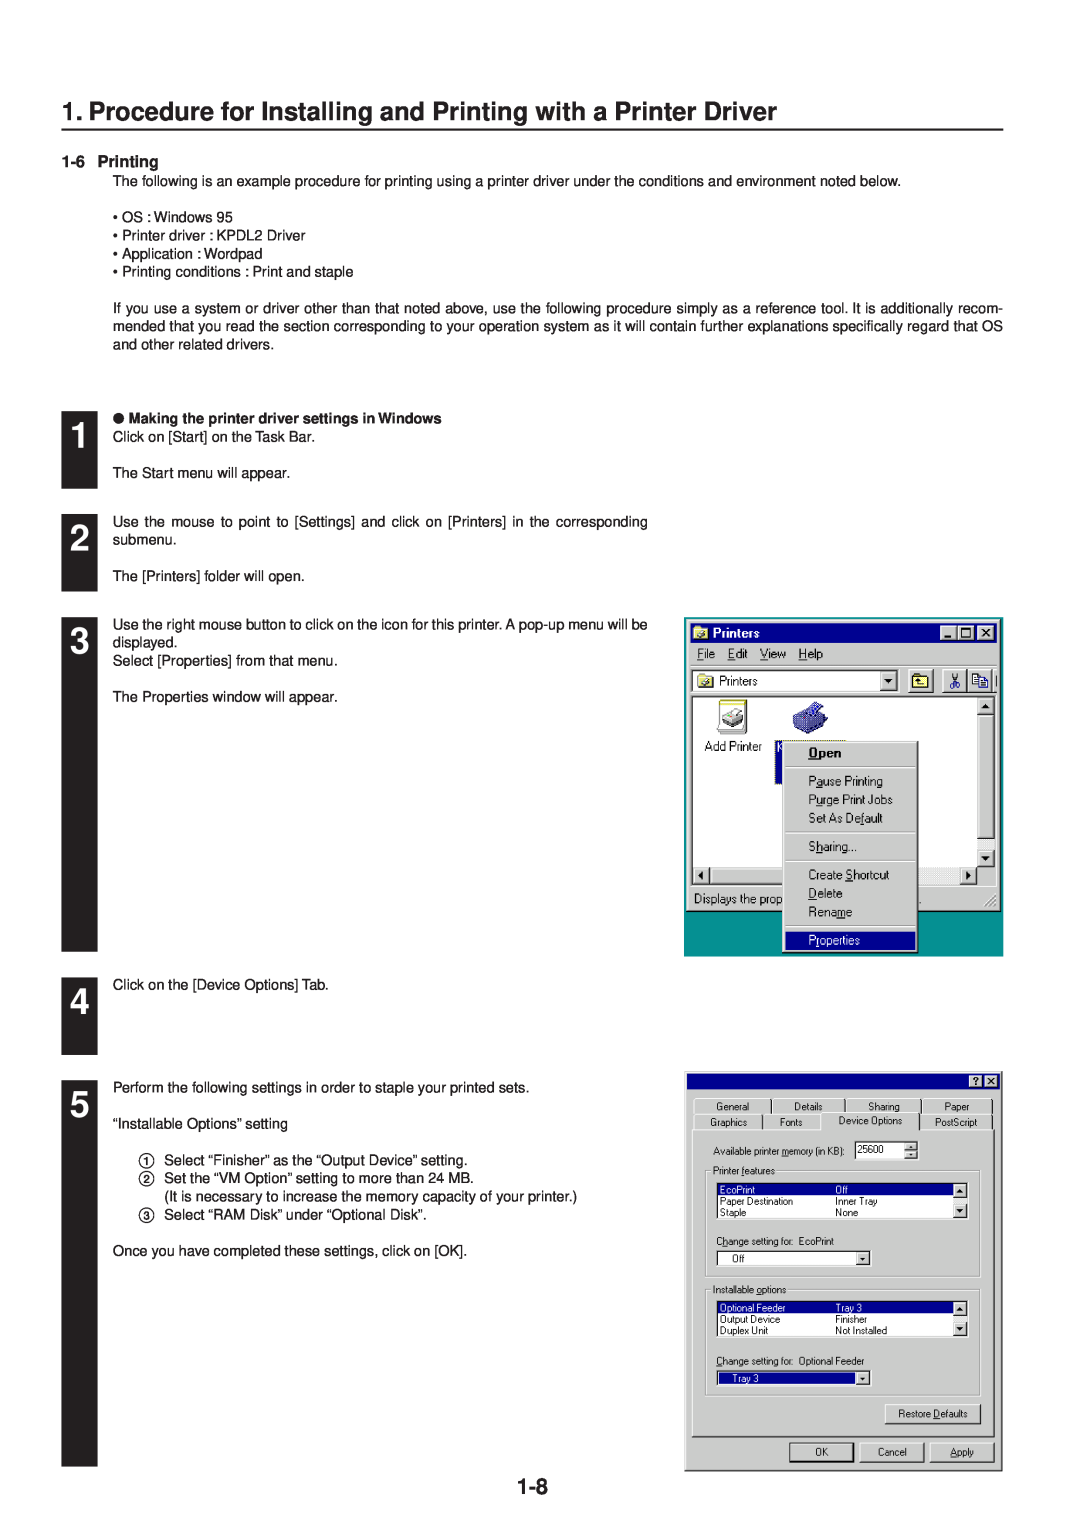 IBM Printing System manual Procedure for Installing and Printing with a Printer Driver 